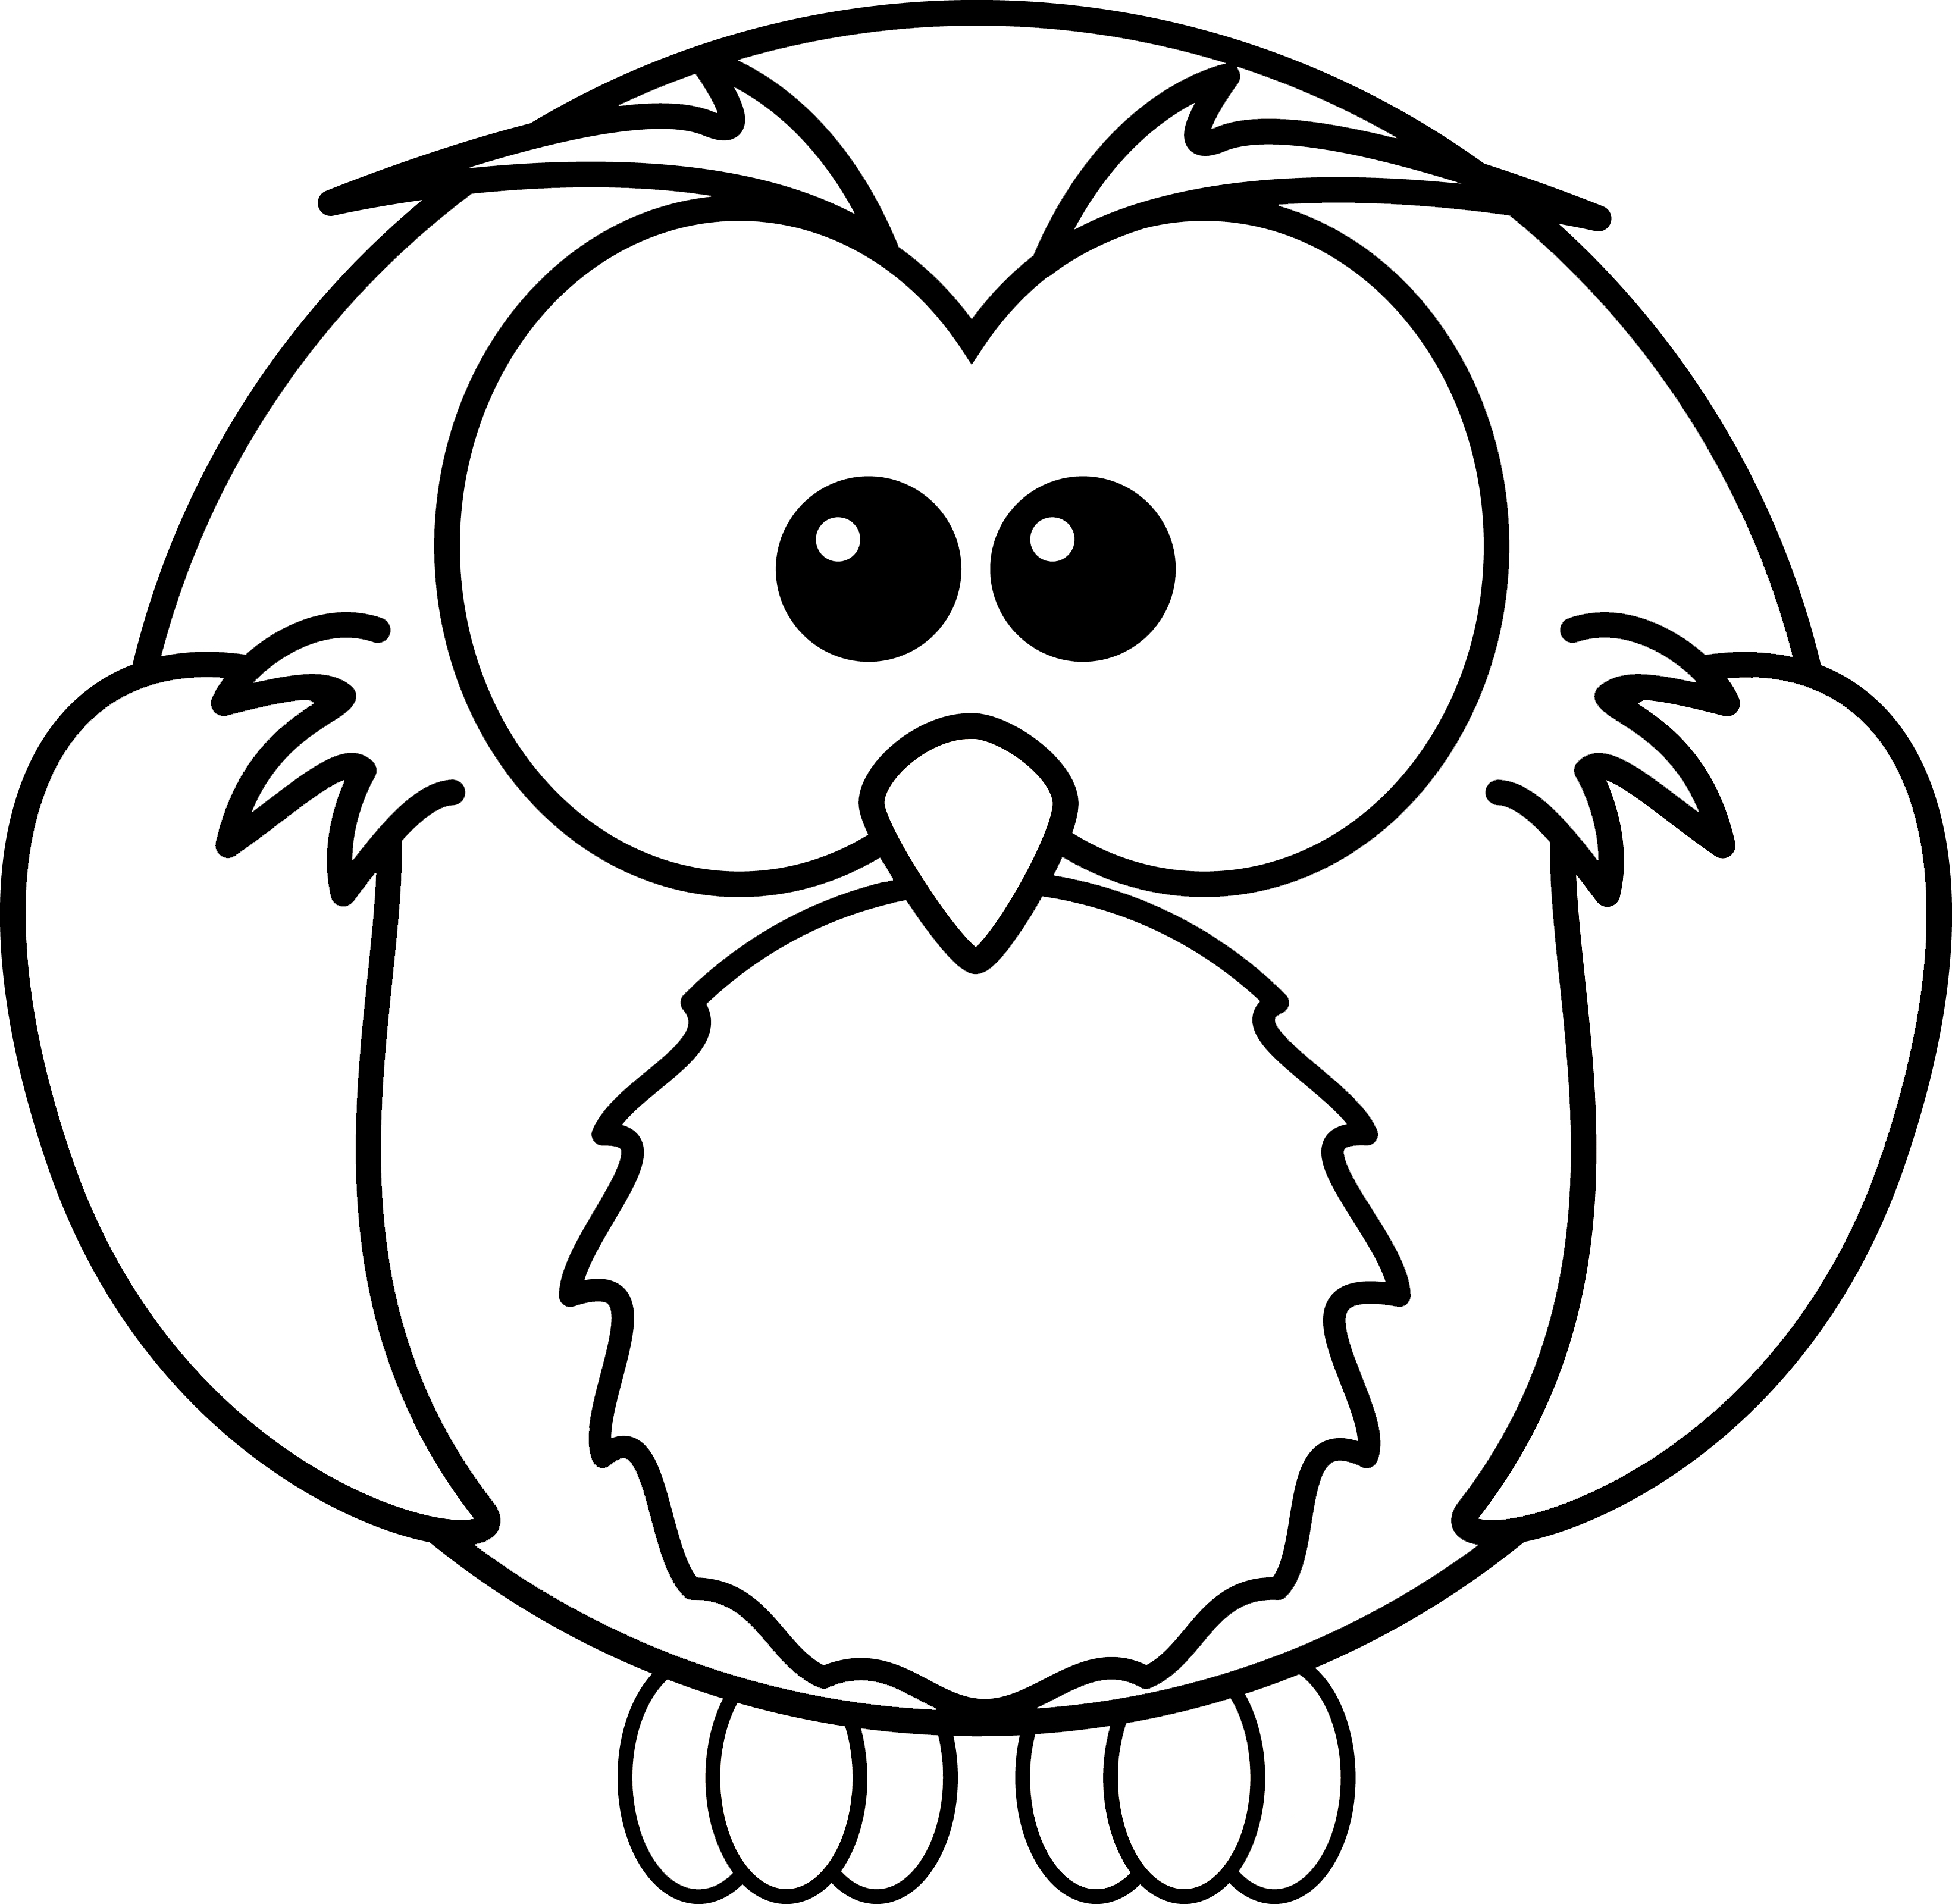 Free Printable Owl Coloring Pages For Kids - ClipArt Best ...